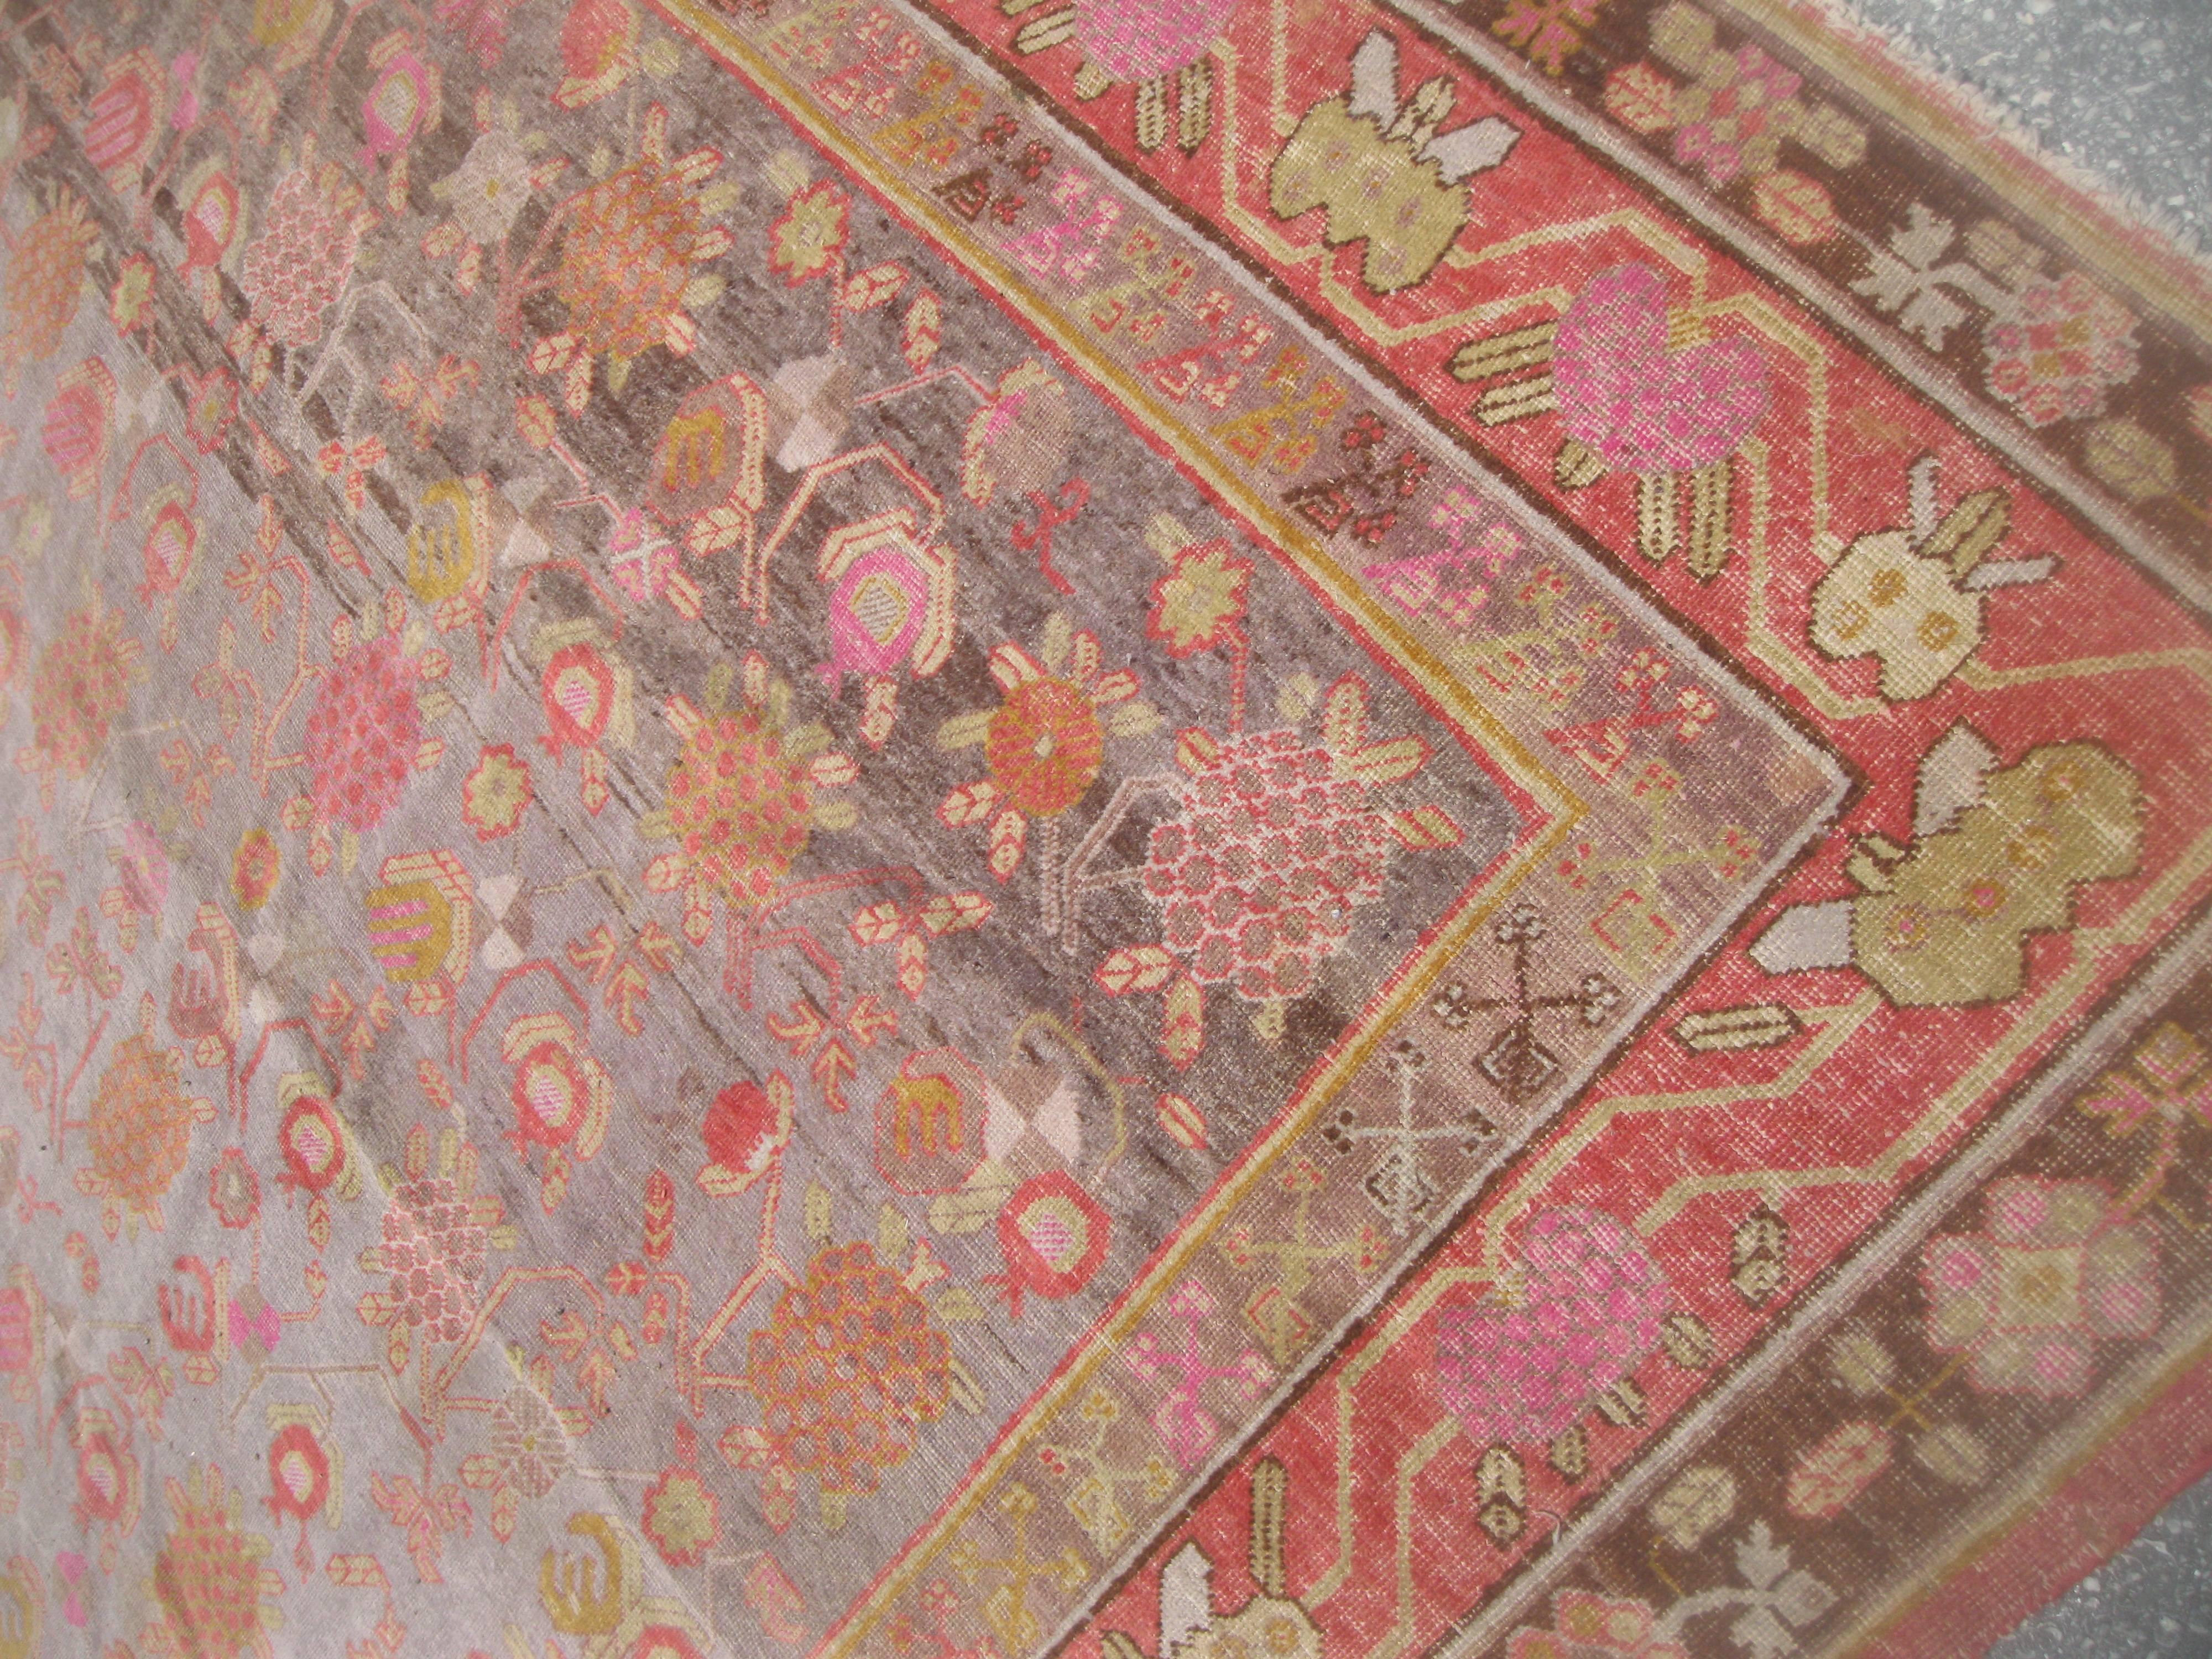 20th Century Antique Khotan Rug with Eight Band Border in Browns and Oranges For Sale